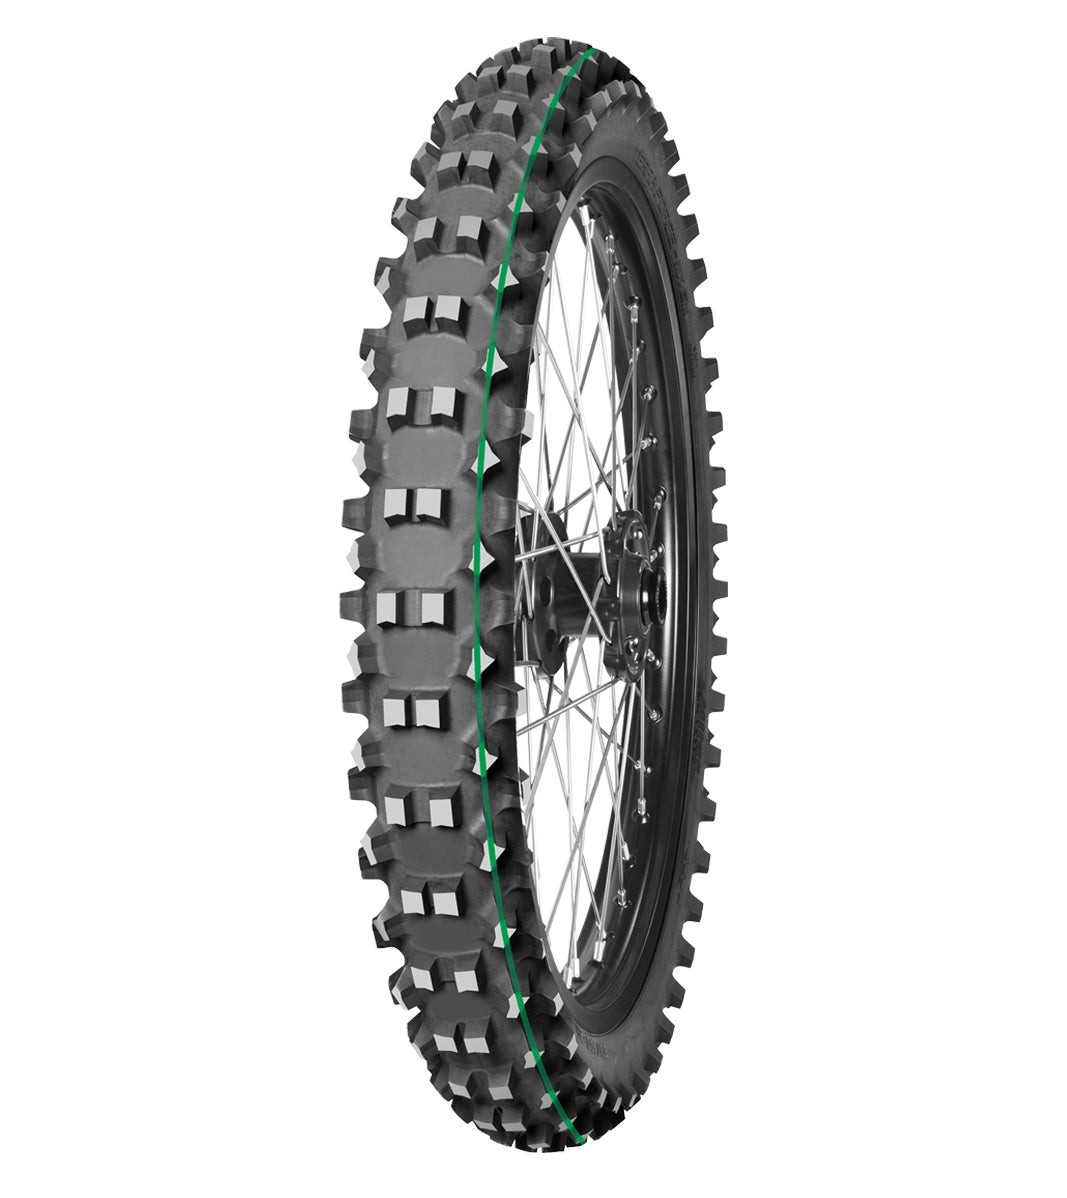 Mitas TERRA FORCE-MX MH 90/100-21 Enduro Competition Off-Road SUPER LIGHT 57M Green Tube Front Tire, 226660, 90/100-21, Enduro Competition, Front, Off-Road, Terra Force, Terra Force-MX MH, Trail, Tires - Imported and distributed in North &amp; South America by Lindeco Genuine Powersports - Premier Powersports Equipment and Accessories for Motorcycle Enthusiasts, Professional Riders and Dealers.